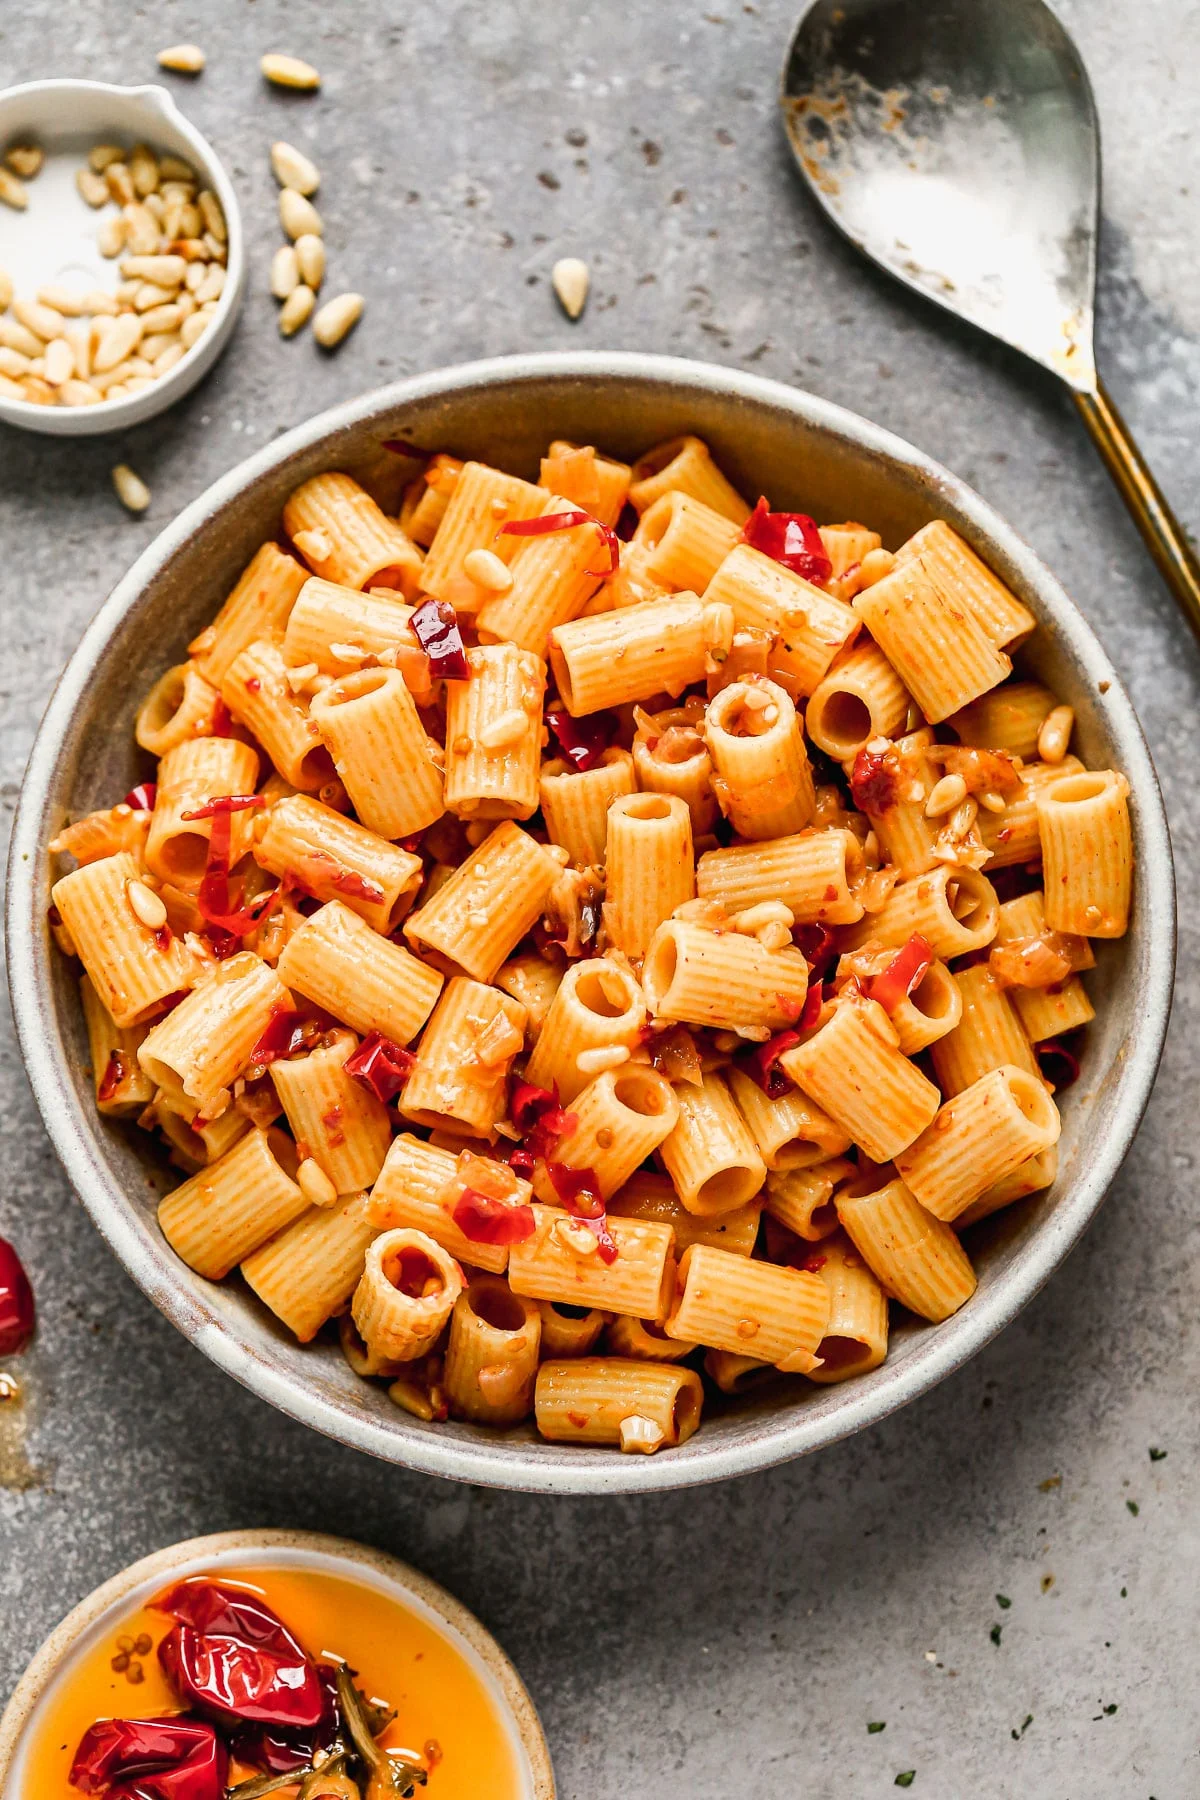 Calabrian Chili Pasta. Fiercely spicy, creamy (without the addition of any cream), cheesy, and peppered with hidden bits of crunch and texture from tiny pine nut treasures. 